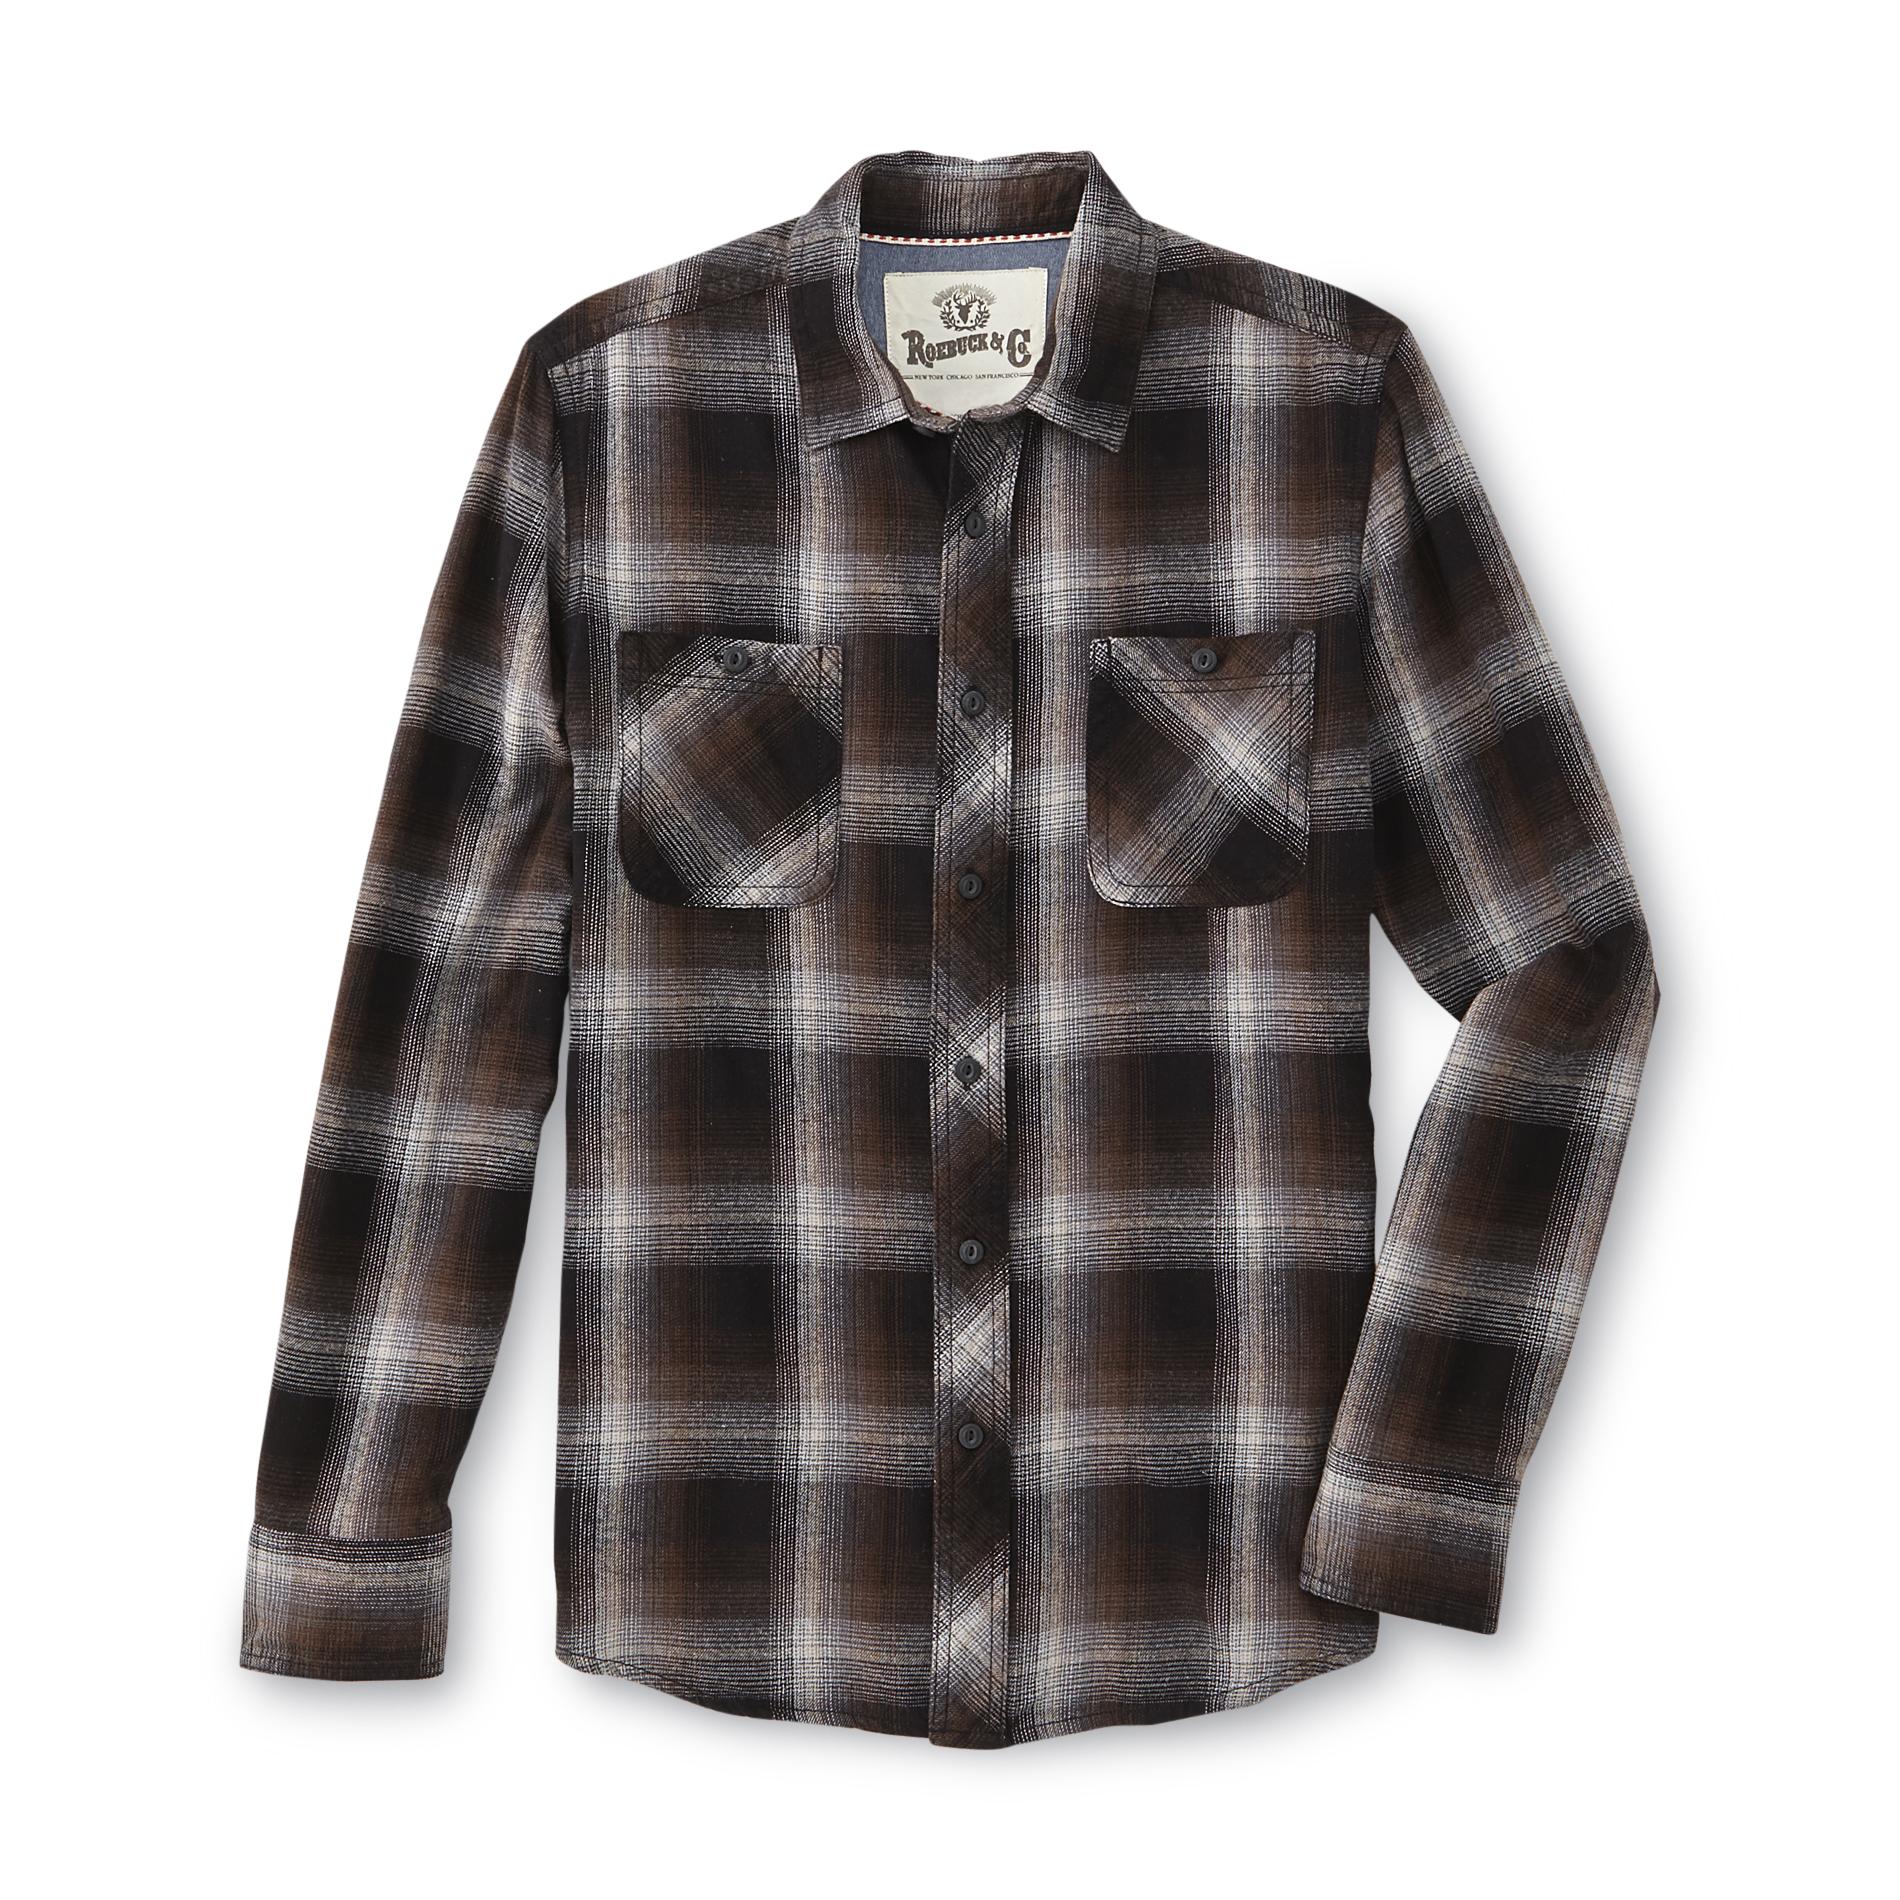 Roebuck & Co. Young Men's Flannel Shirt - Plaid